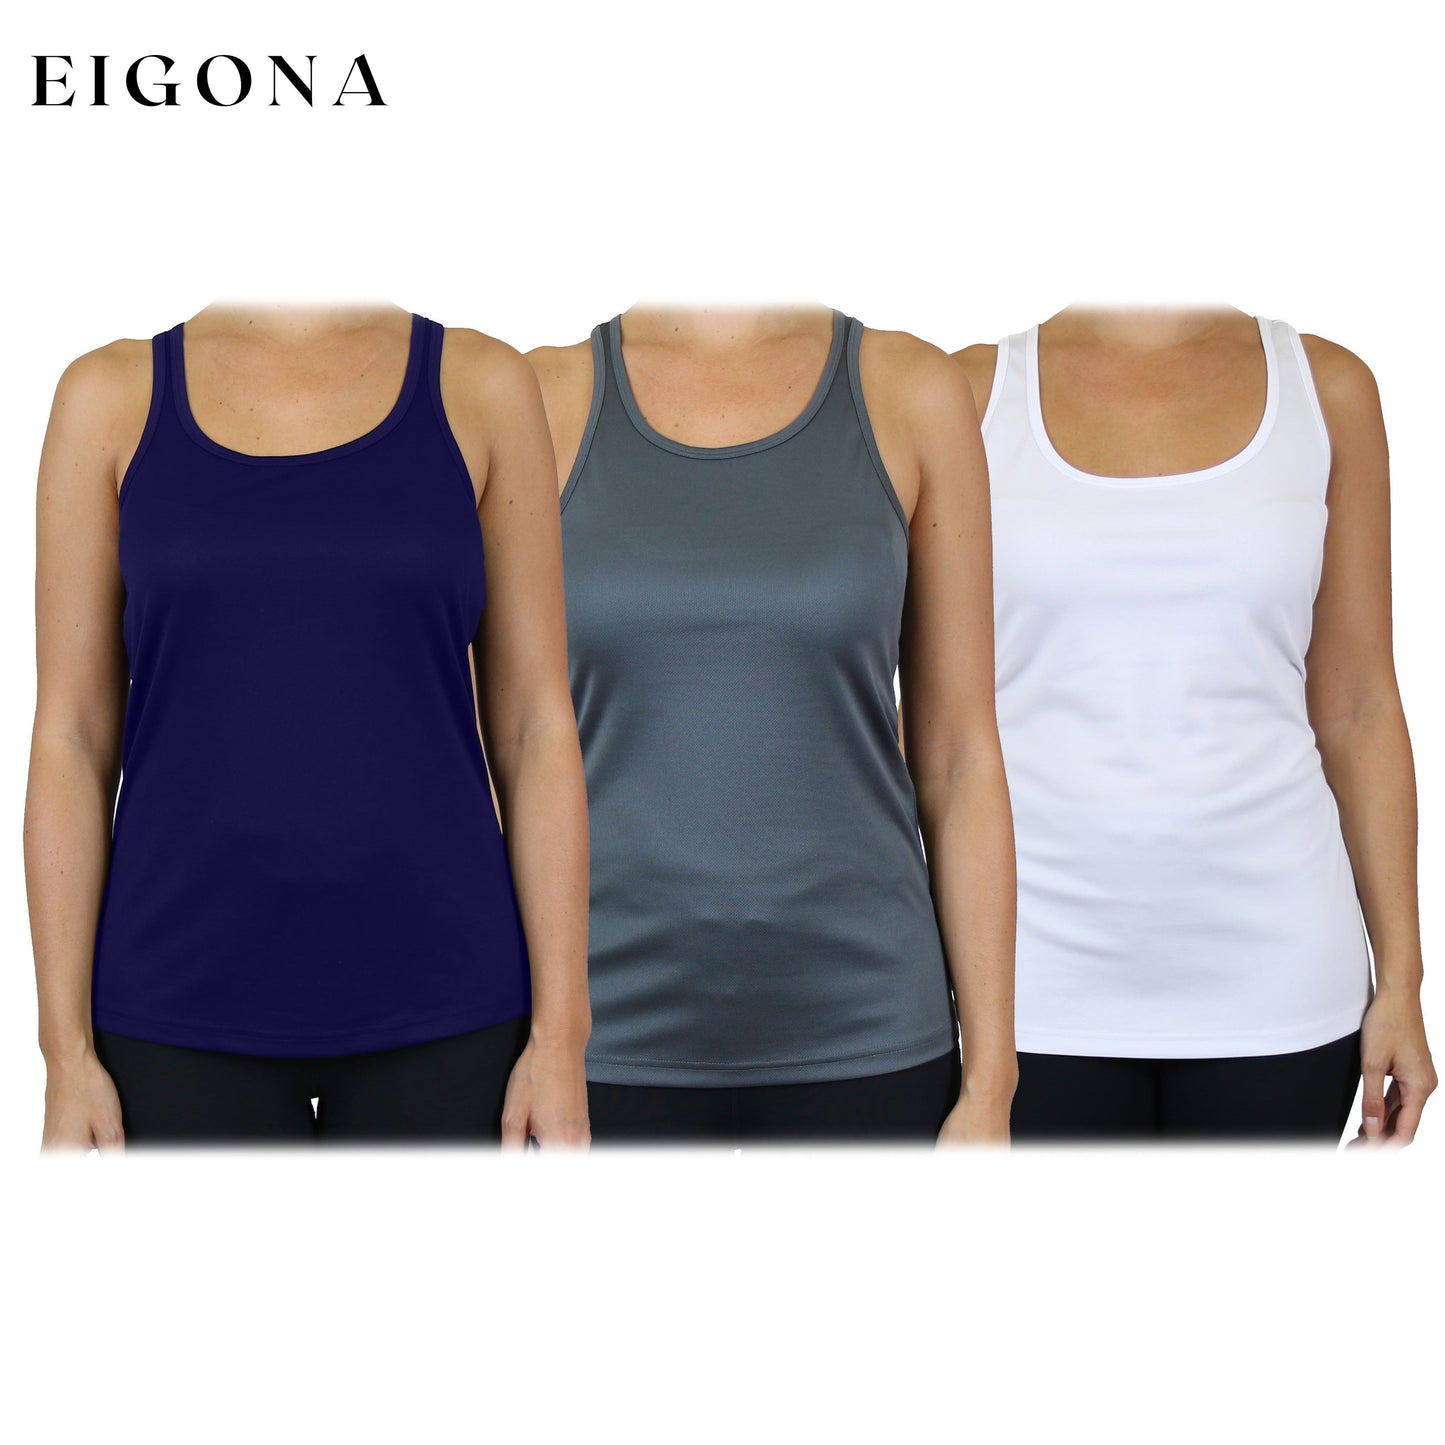 3-Pack: Women's Moisture Wicking Racerback Tank Navy Charcoal White clothes refund_fee:1200 tops